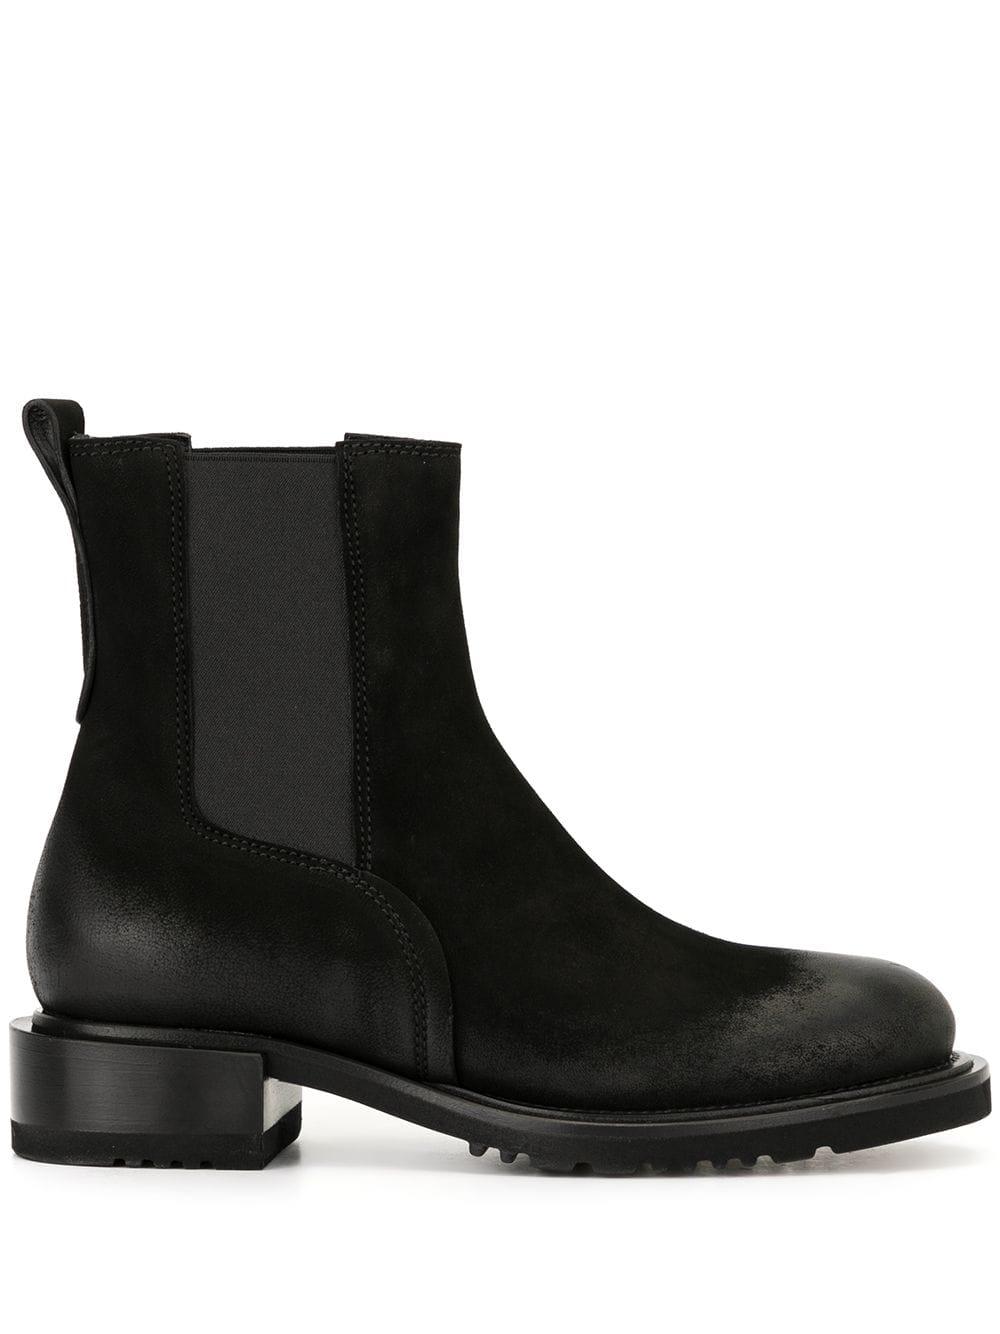 Premiata Leather Distressed Chelsea Boots in Black - Lyst